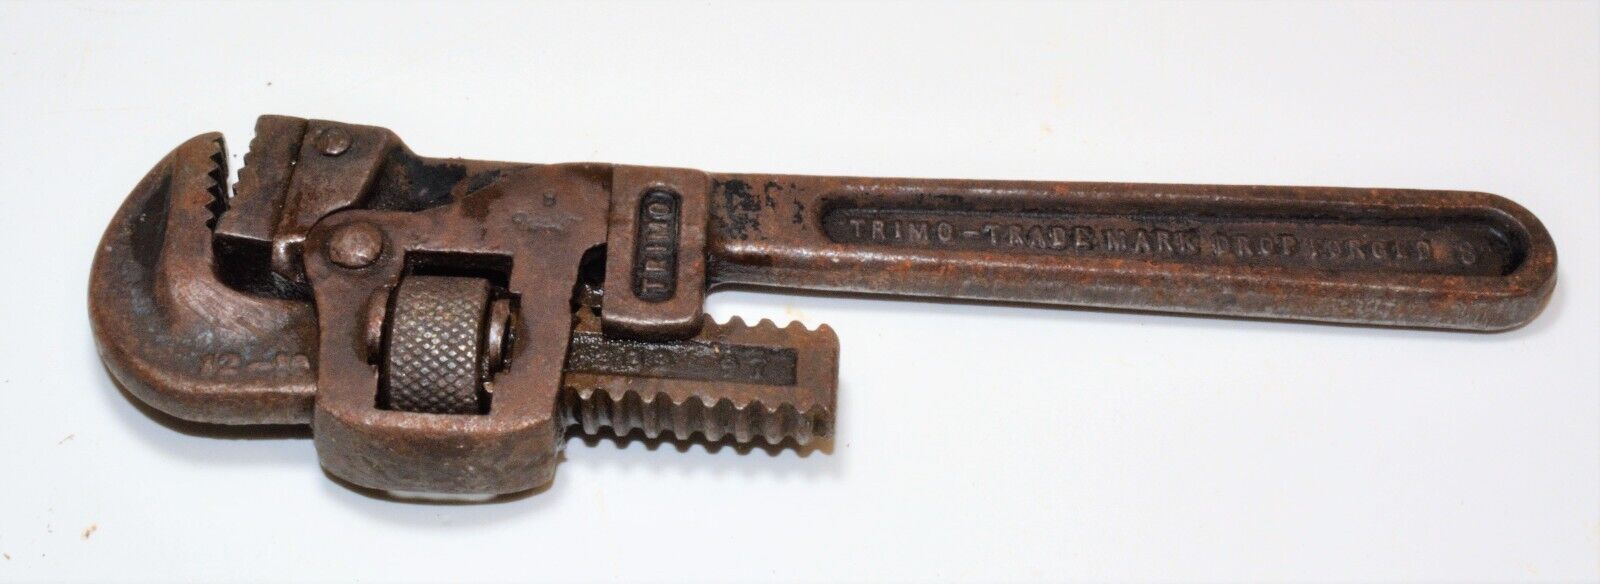 VTG Trimo Drop Forged Adjustable pipe wrench by Trimont MFC Co. App. 7” closed